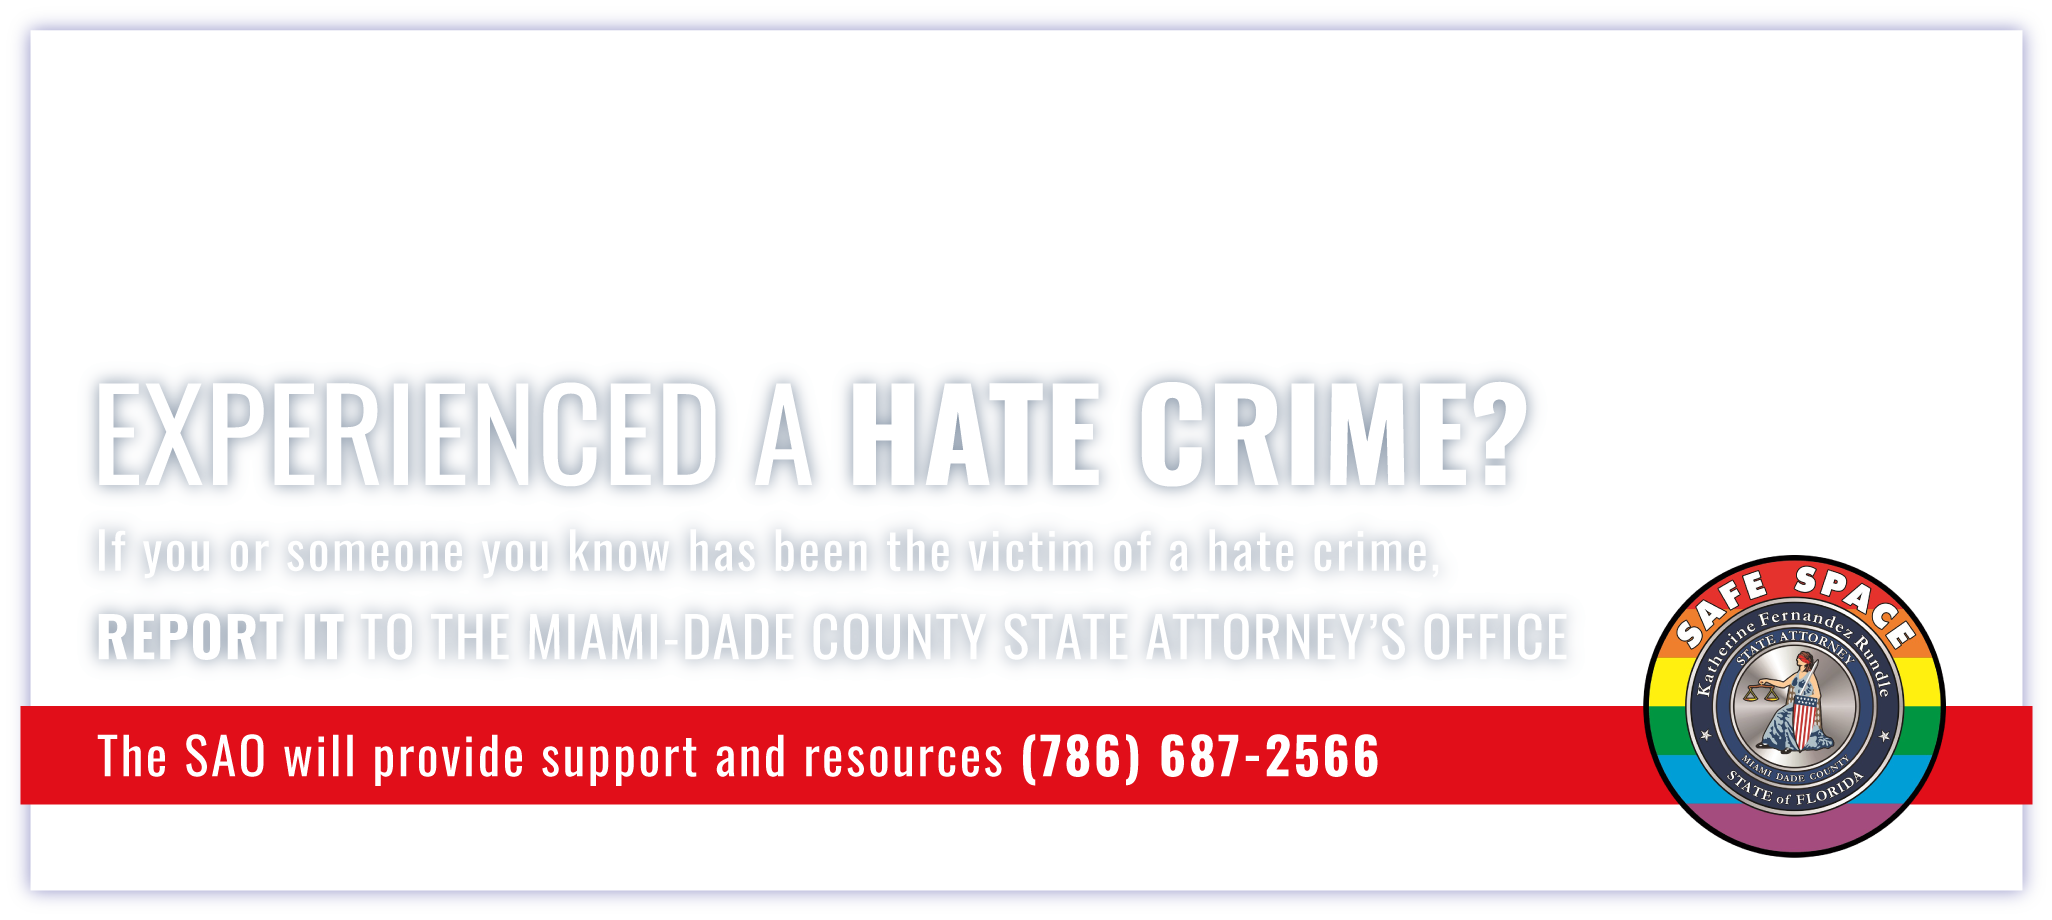 Report Hate Crime to the State Attorney Office